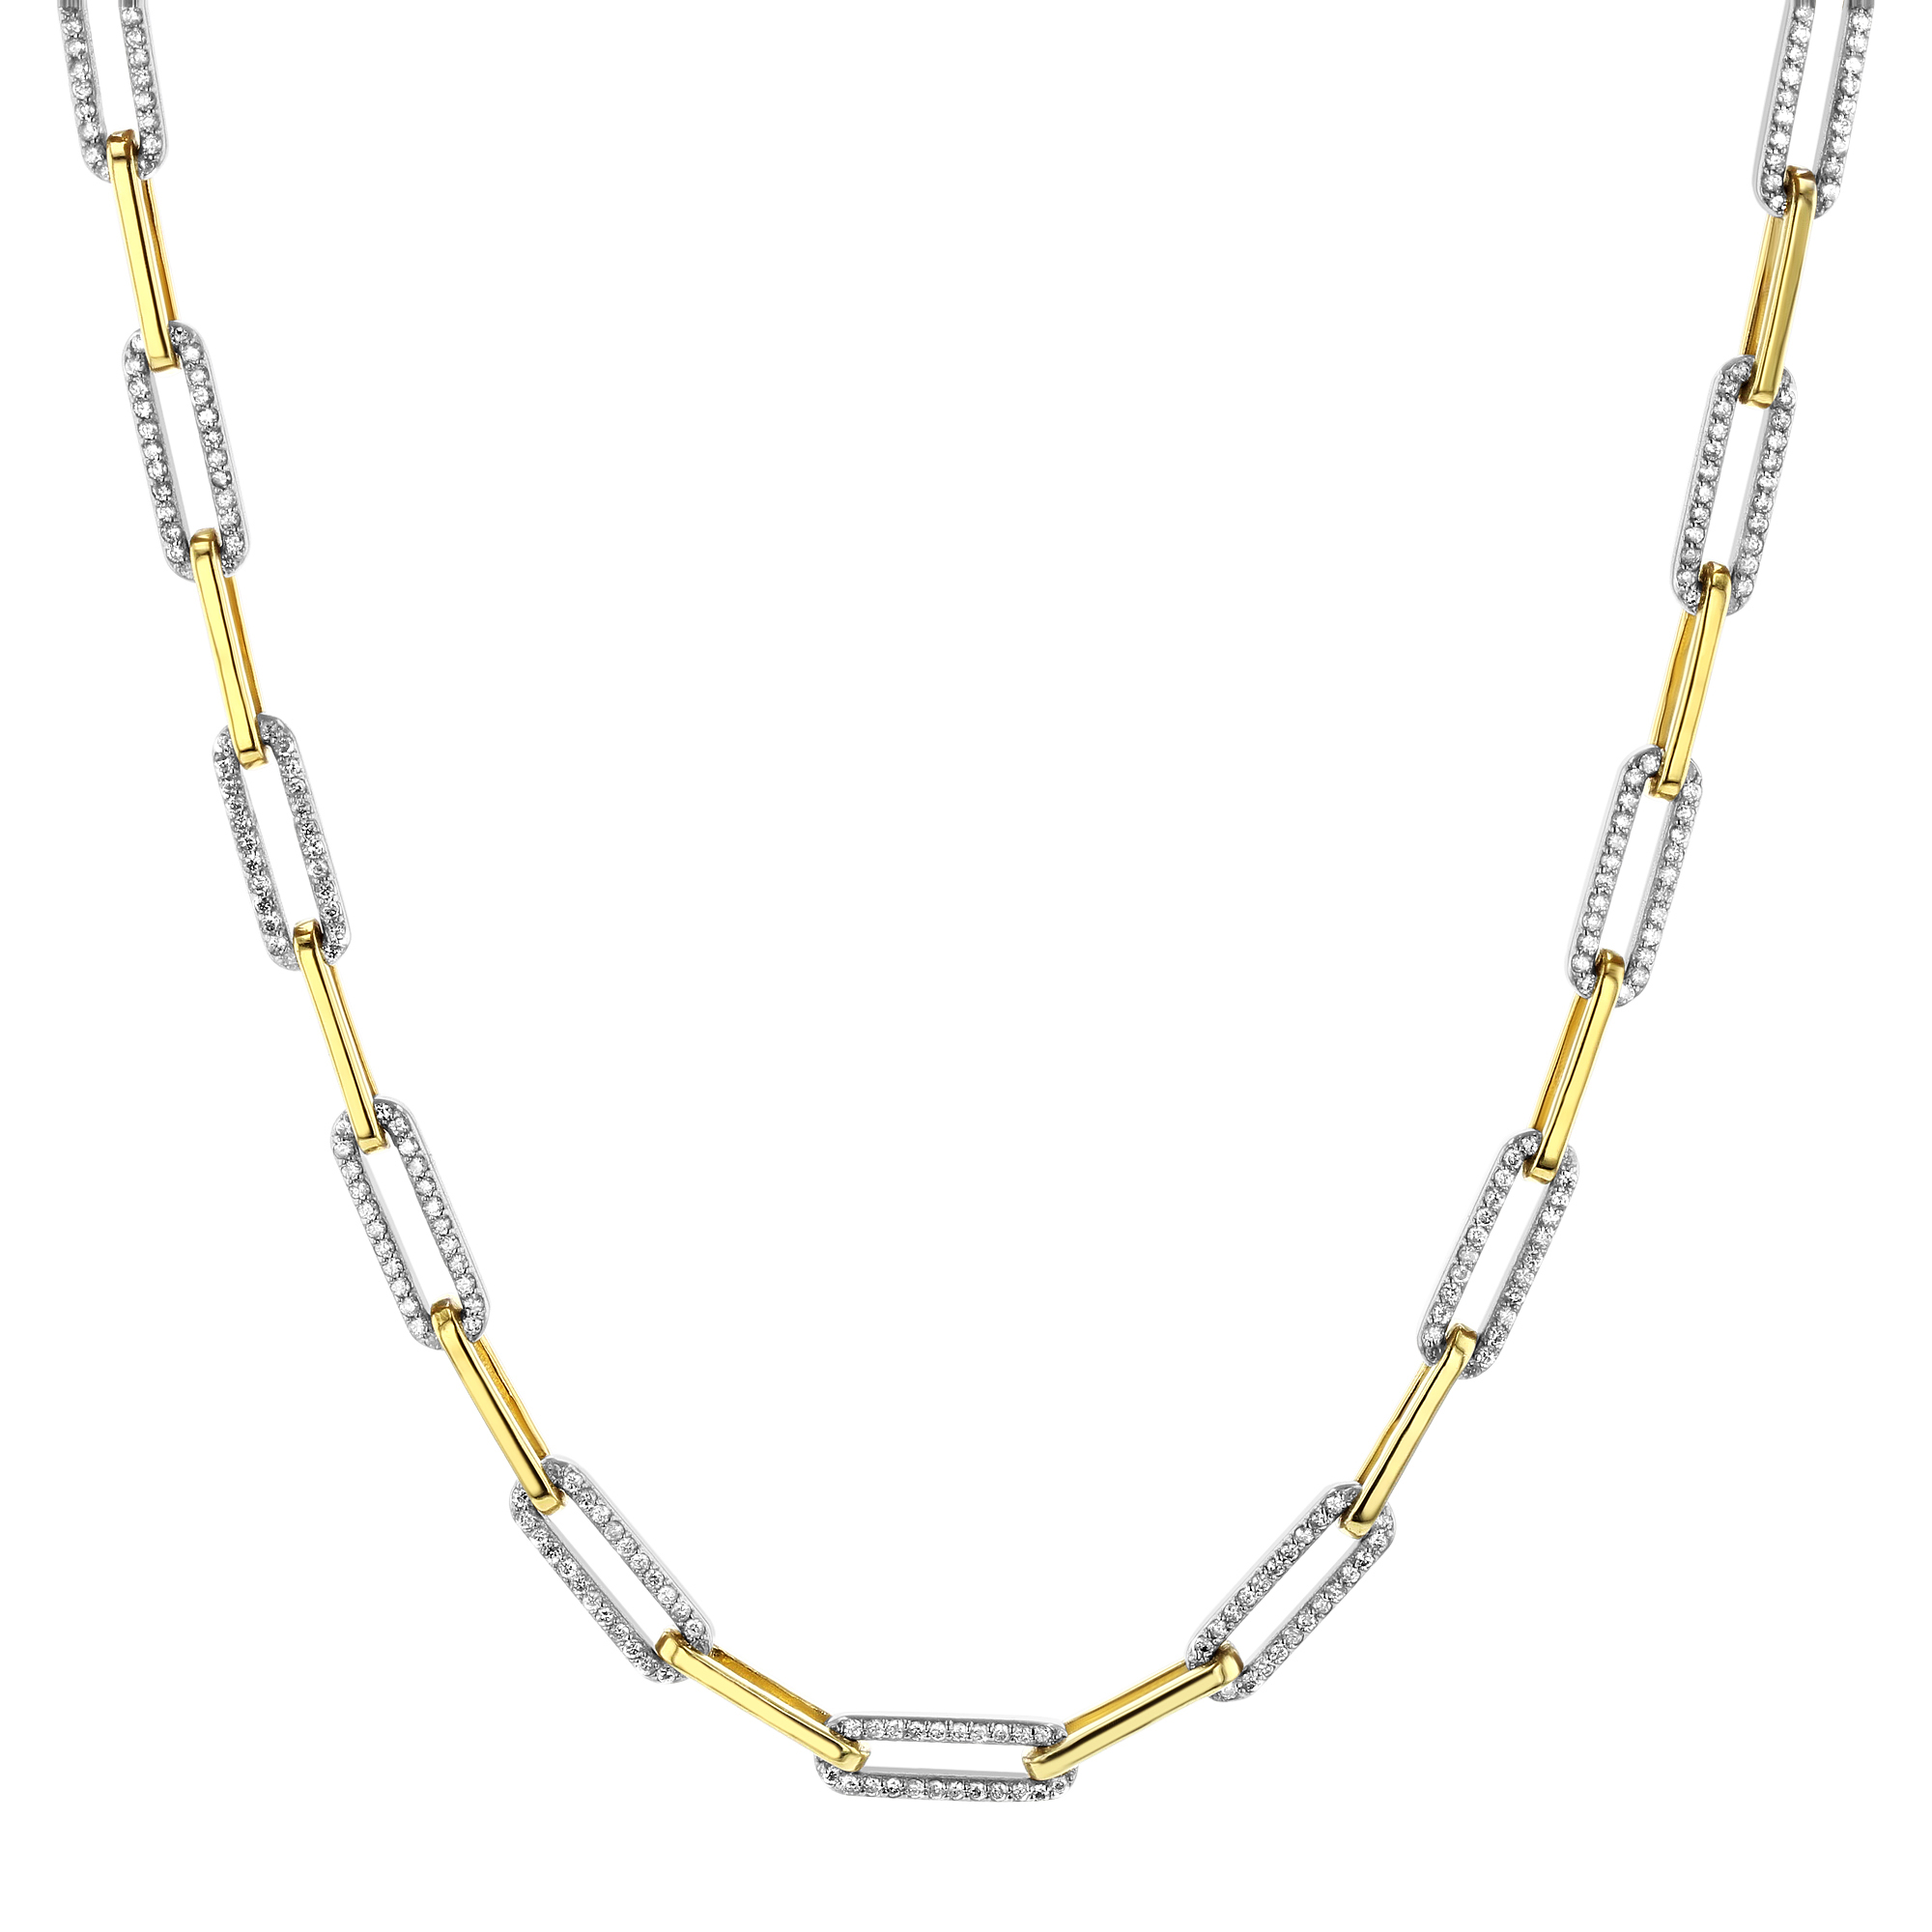 View 3.00ctw Diamond Paperclip Necklace in 14k Two ToneGold